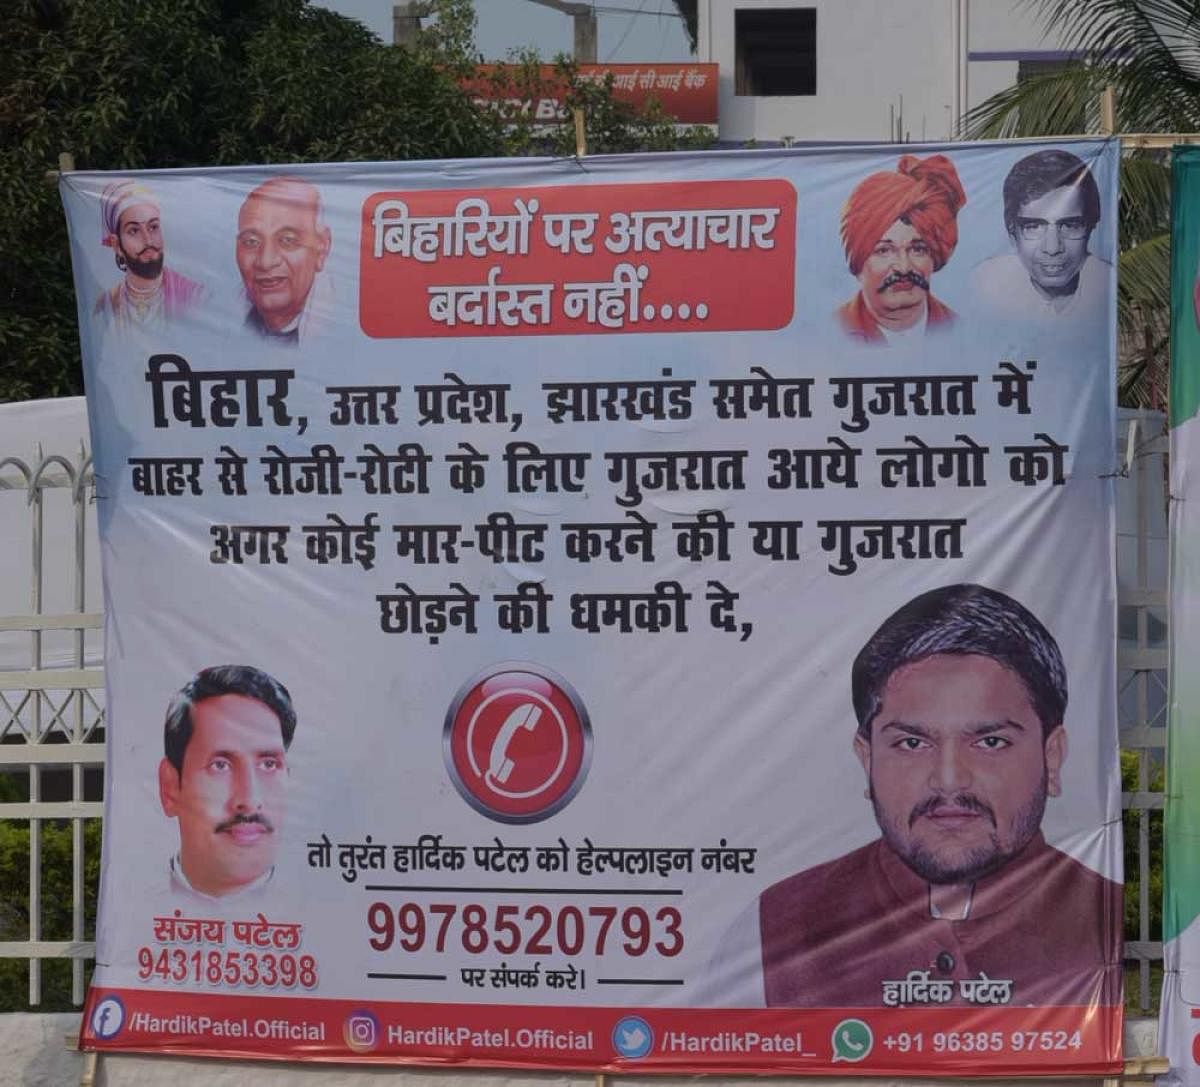 A hoarding of Hardik Patel, assuring protection to Biharis, has been put up at Income Tax Crossing in Patna on Wednesday. DH Photo/MOHAN PRASAD